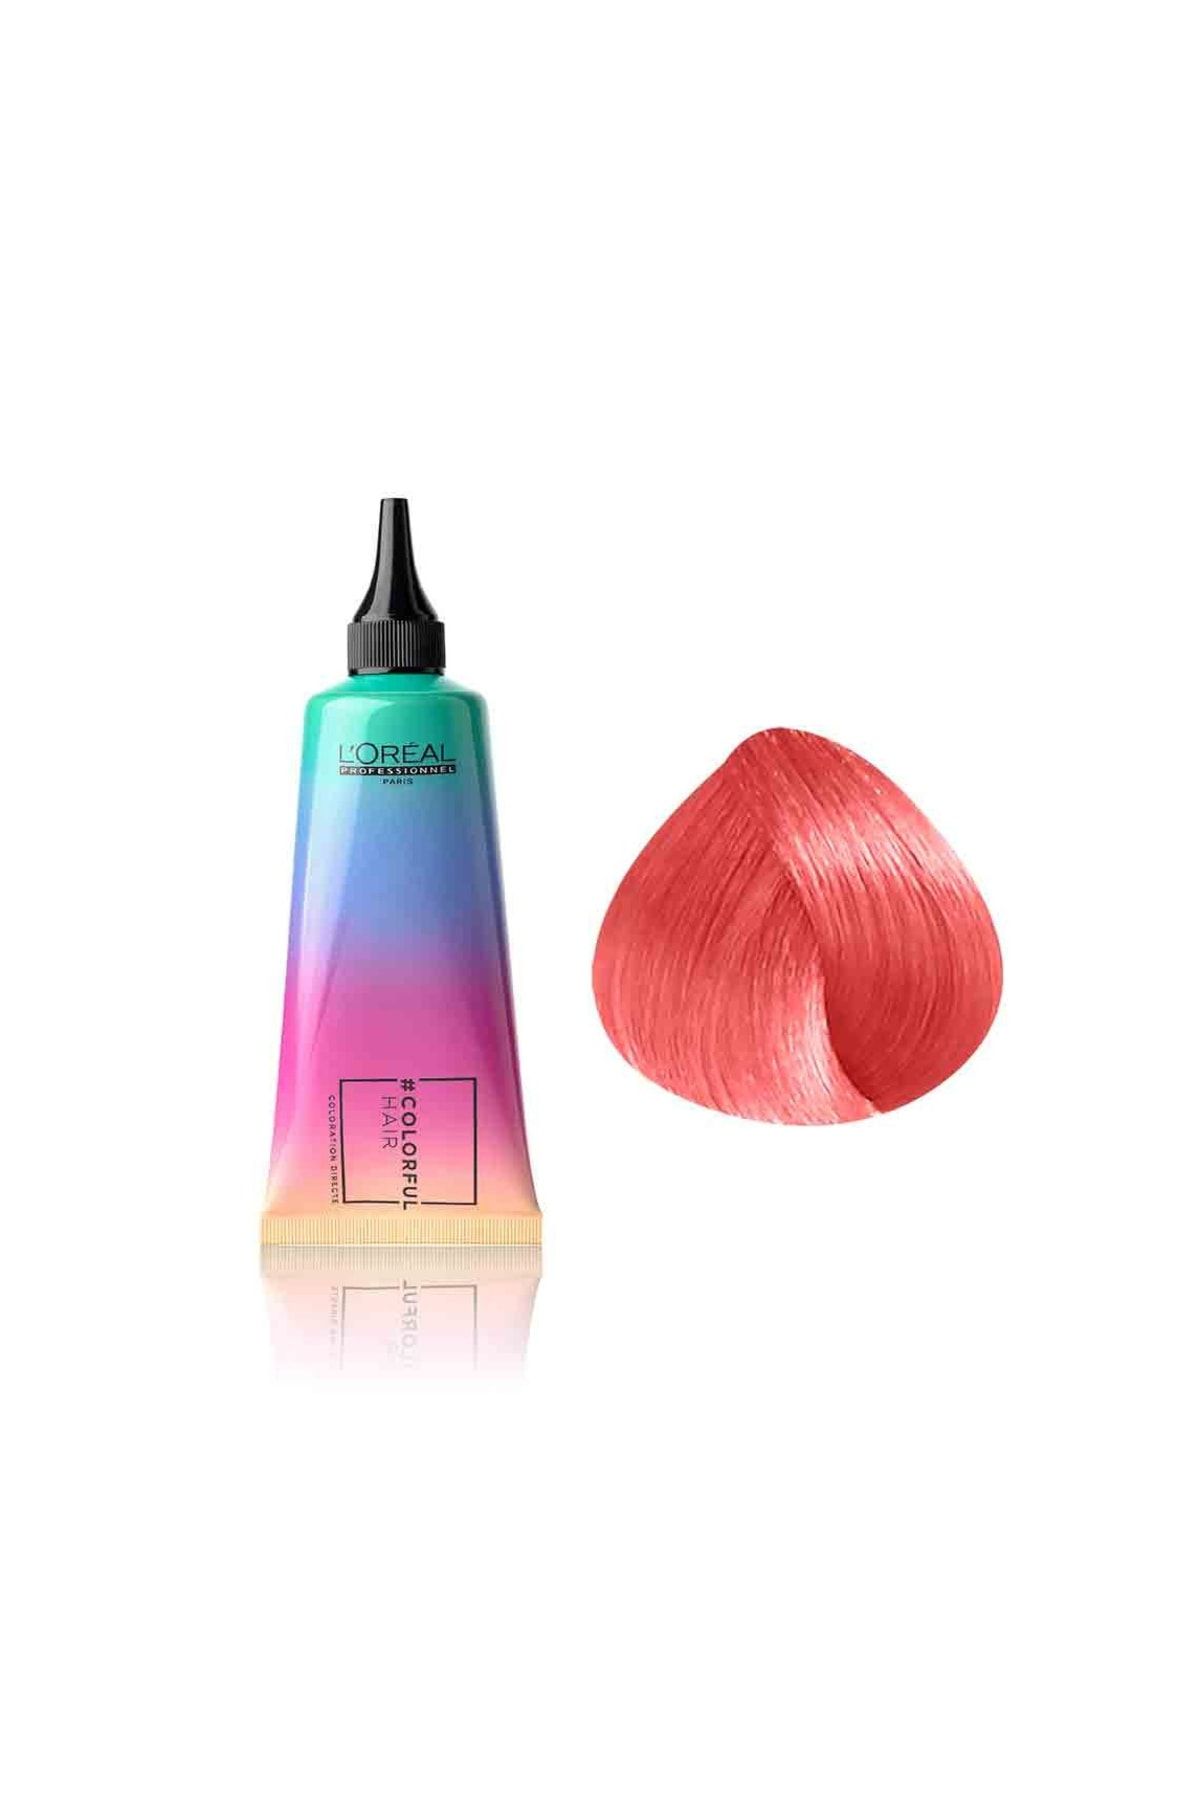 L'oreal Professionnel Colorful Hair Sunset Coral Orange Bright Dazzling Hair Color Cream 90ml